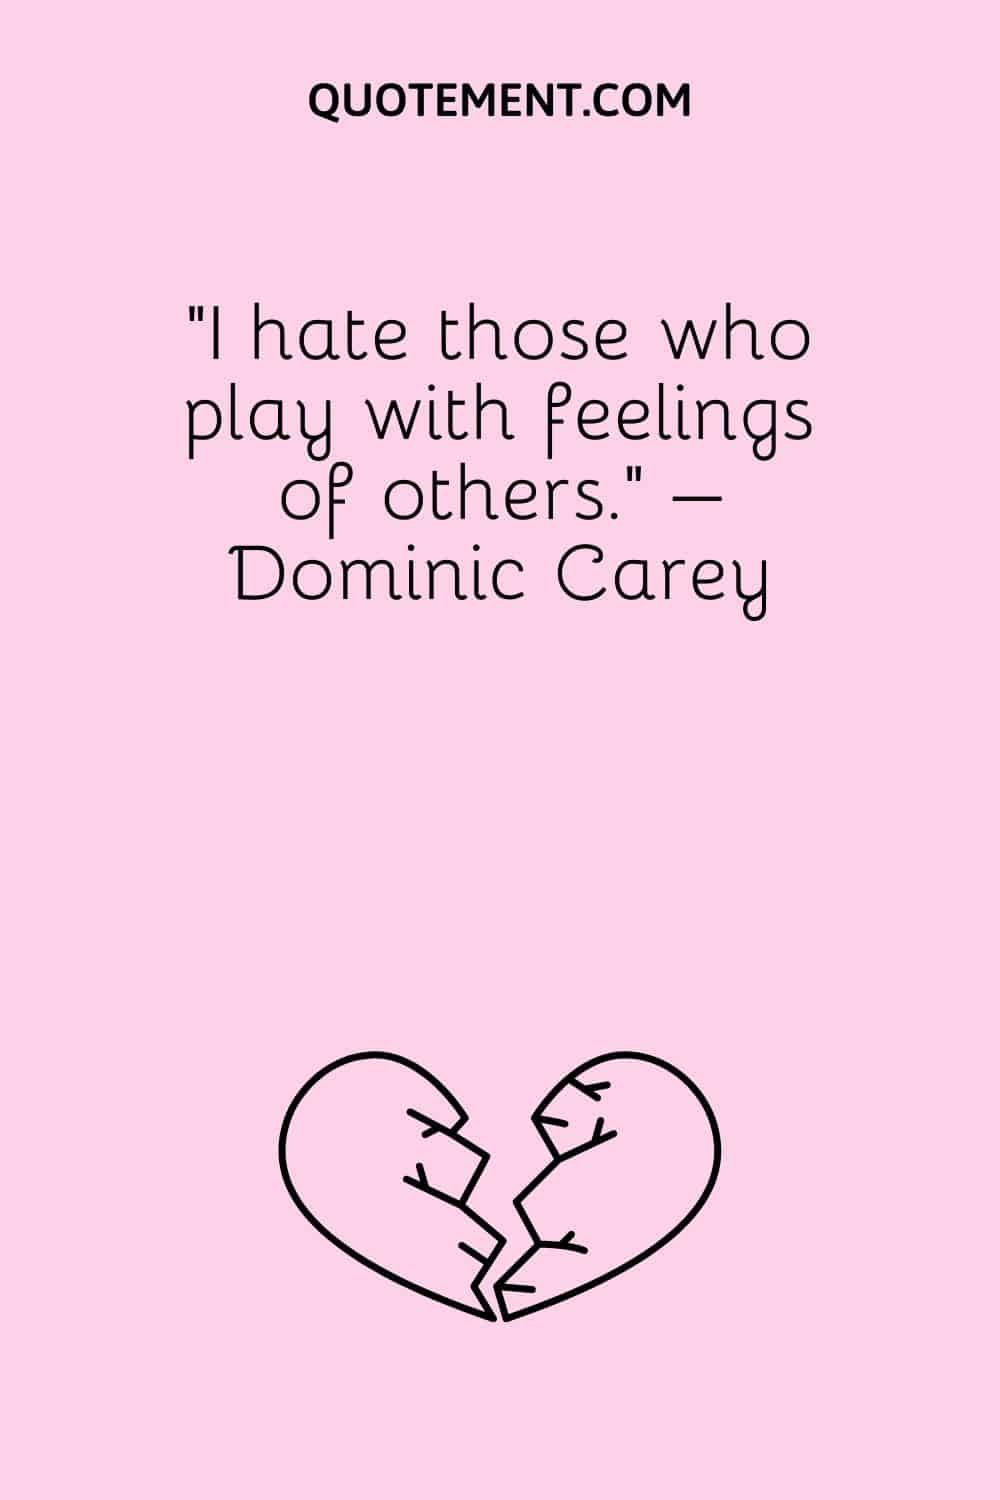 “I hate those who play with feelings of others.” – Dominic Carey